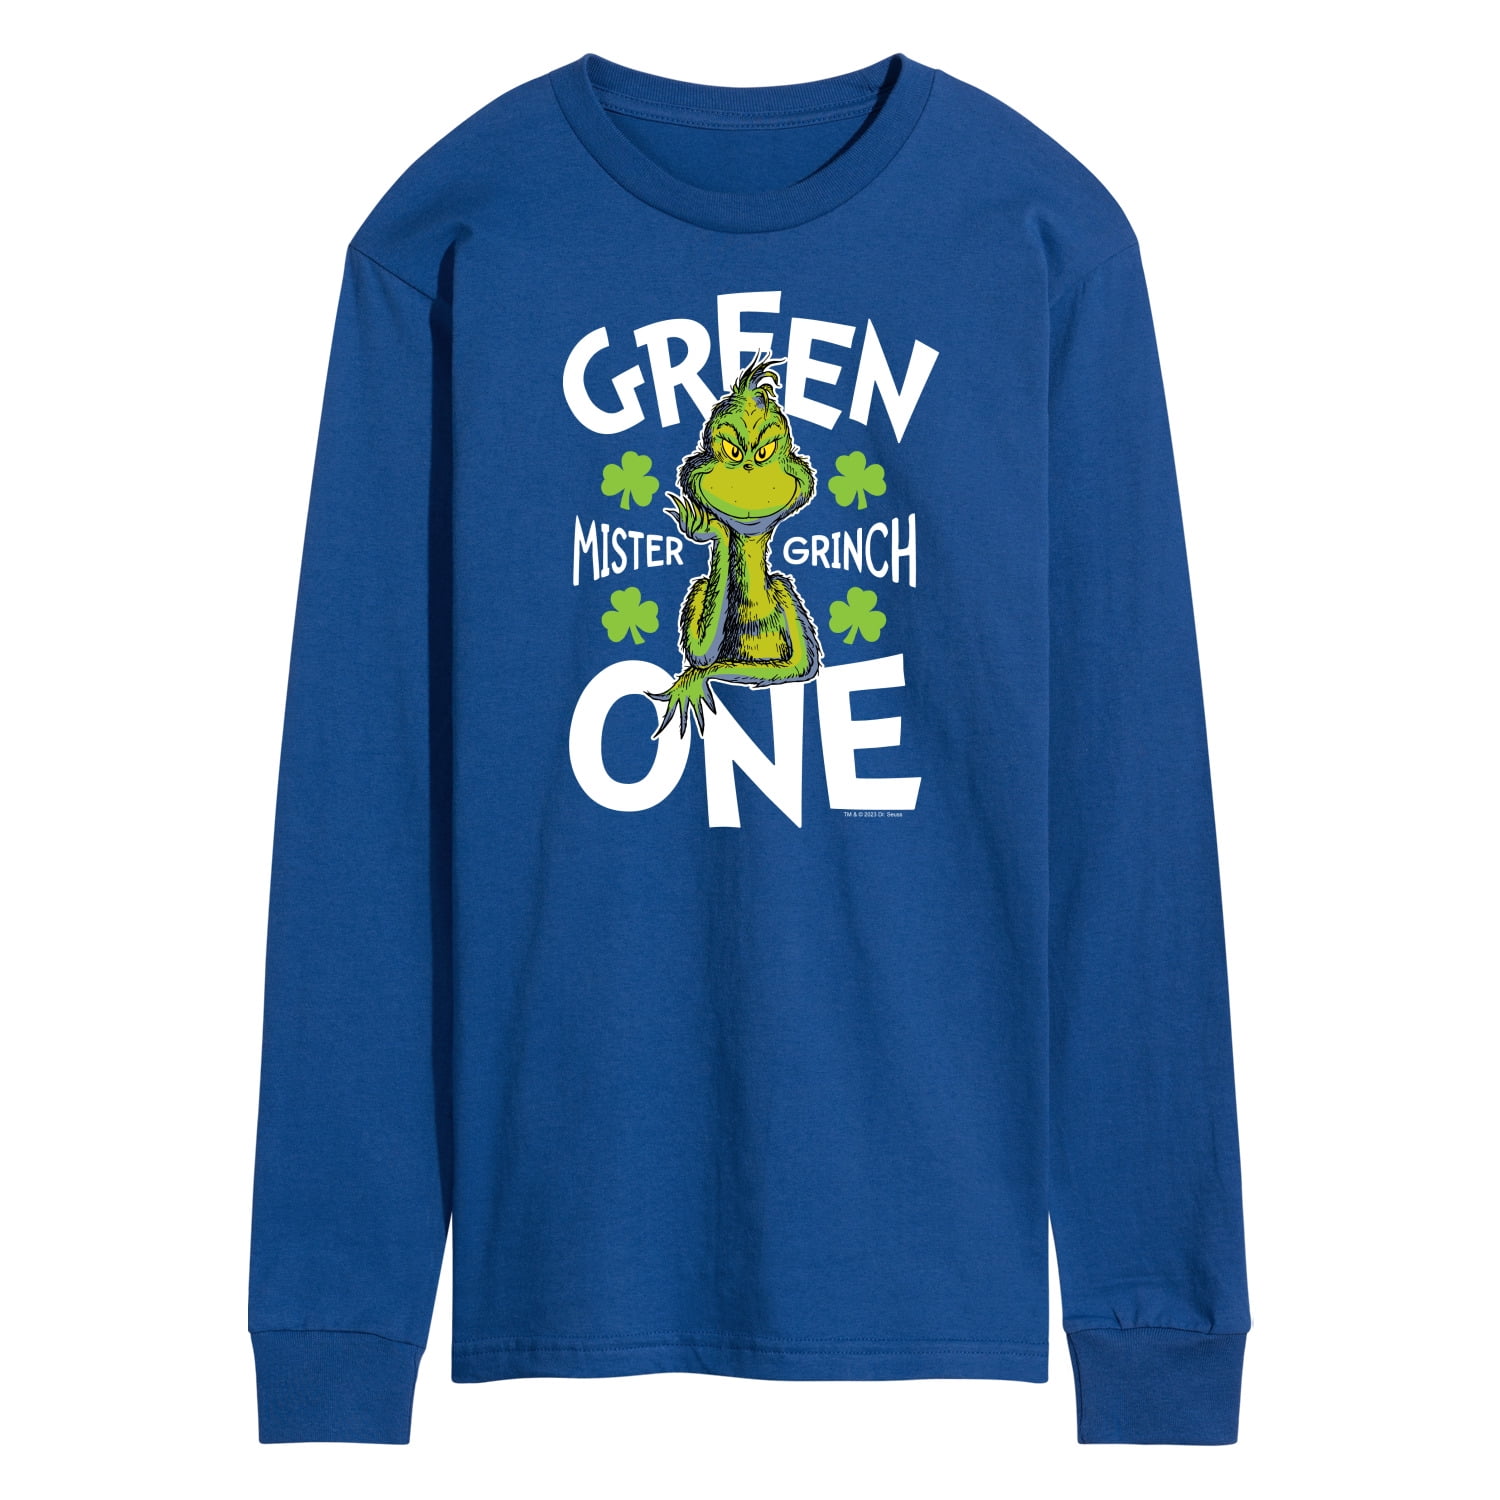 The Grinch - Green One - Men\'s Long Sleeve T-Shirt